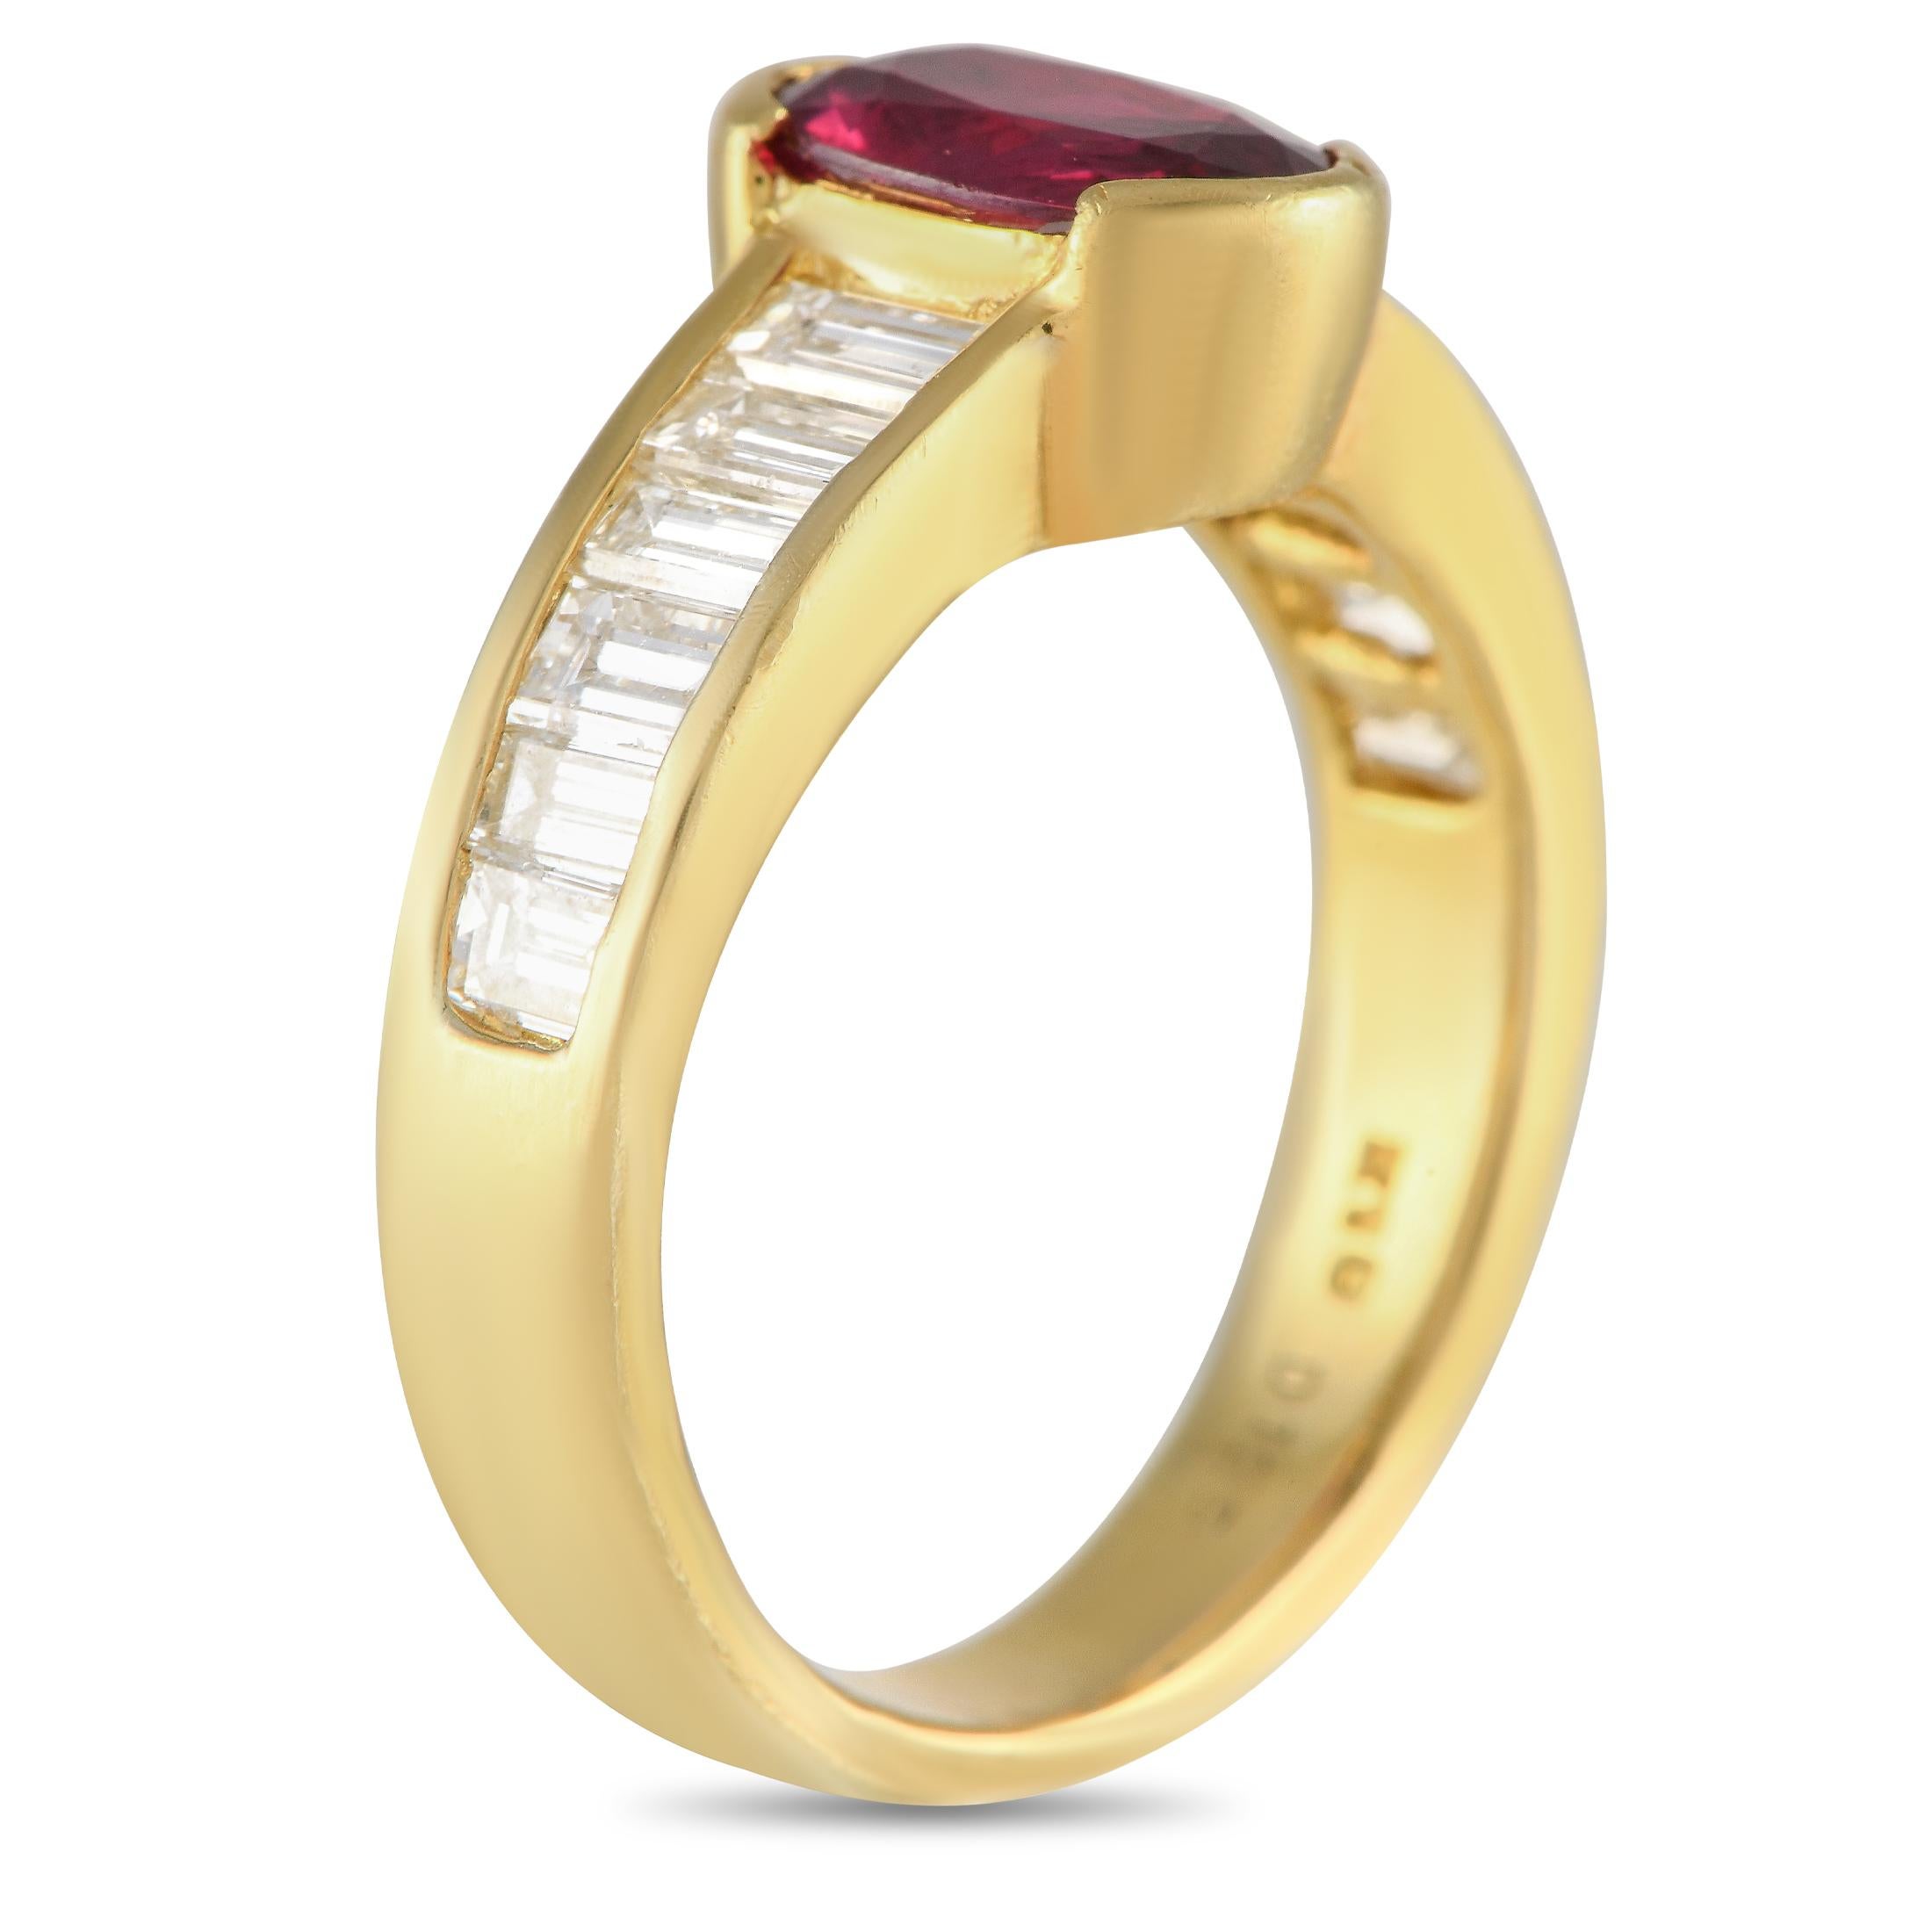 Opulence meets minimalism. This 18K yellow gold ring features an eye-catching oval-cut ruby on a half-bezel setting, flanked by channel-set step-cut diamonds that gracefully graduate in size. This fine piece of jewelry is suitable for someone who